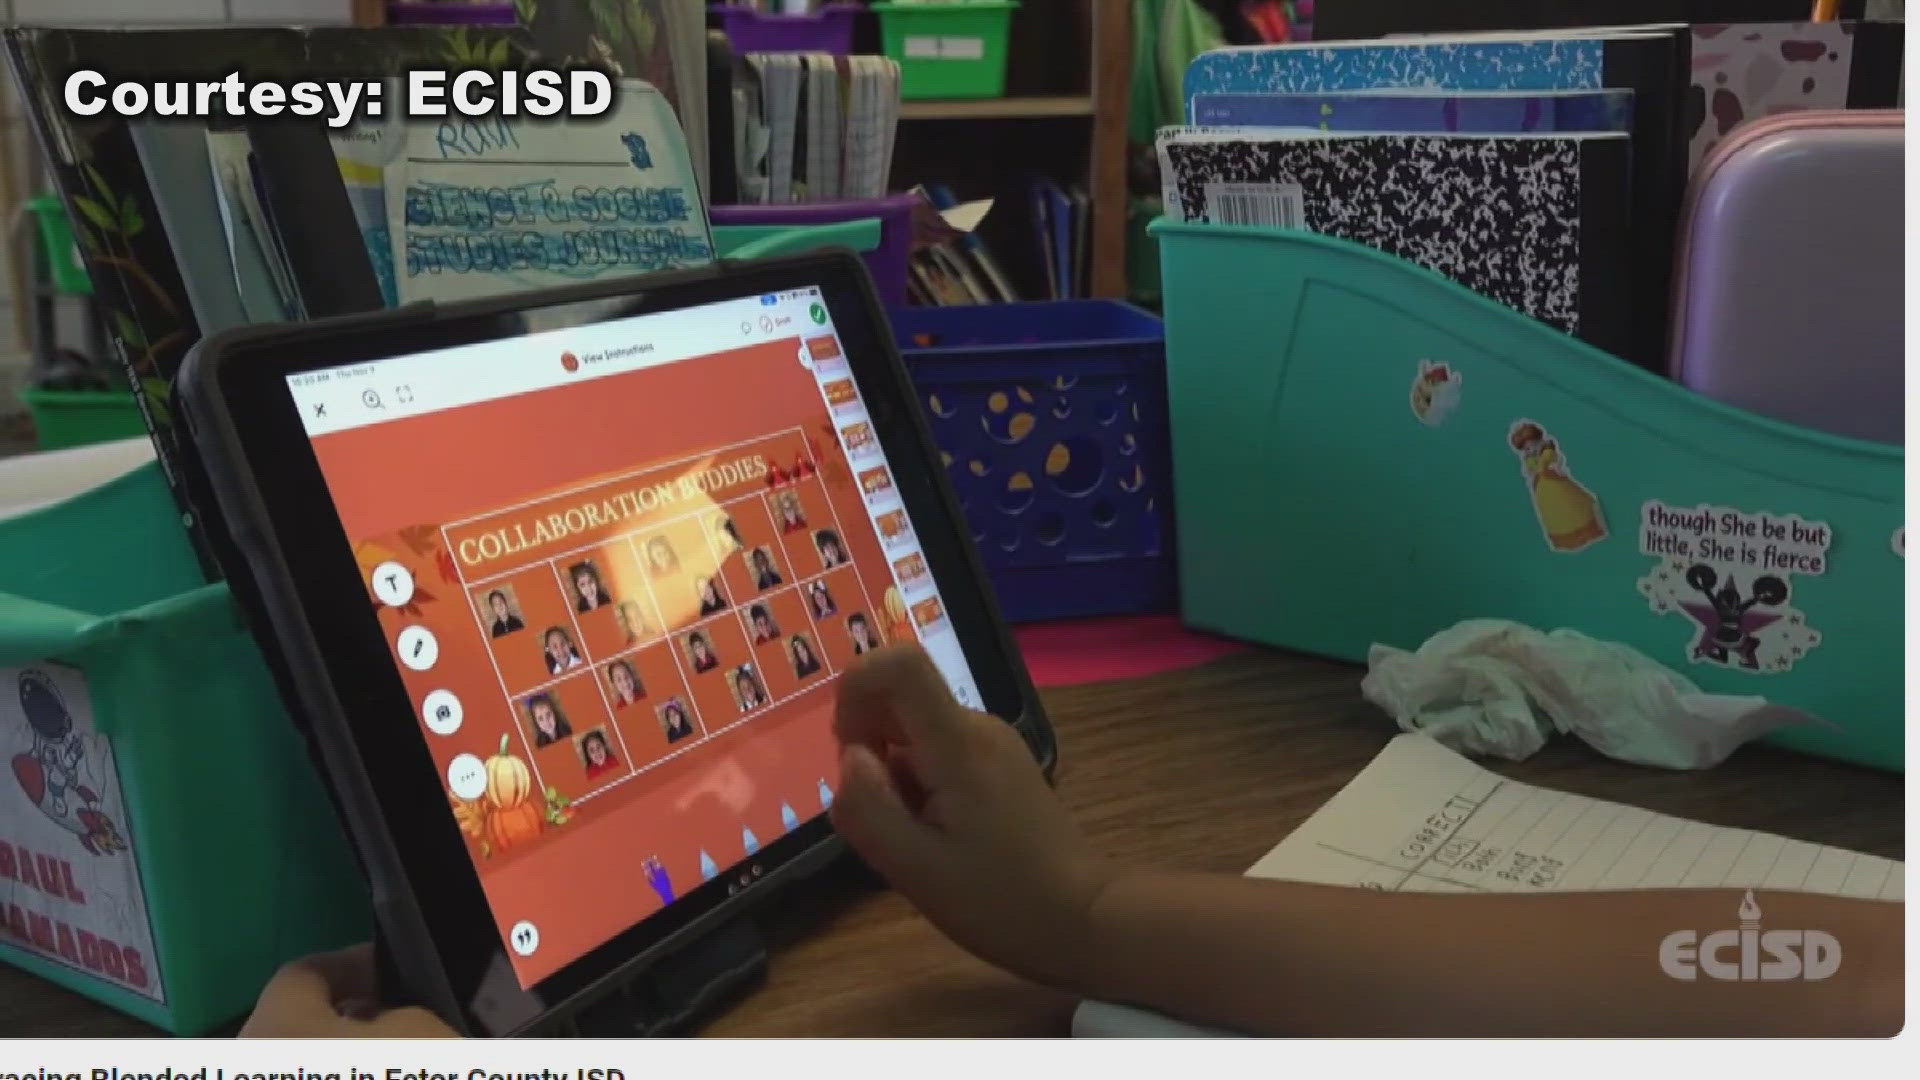 In 2024, the ECISD school fully implemented blended learning. According to Principal Arrott, the tablets contain adaptive software that offer personalized learning.